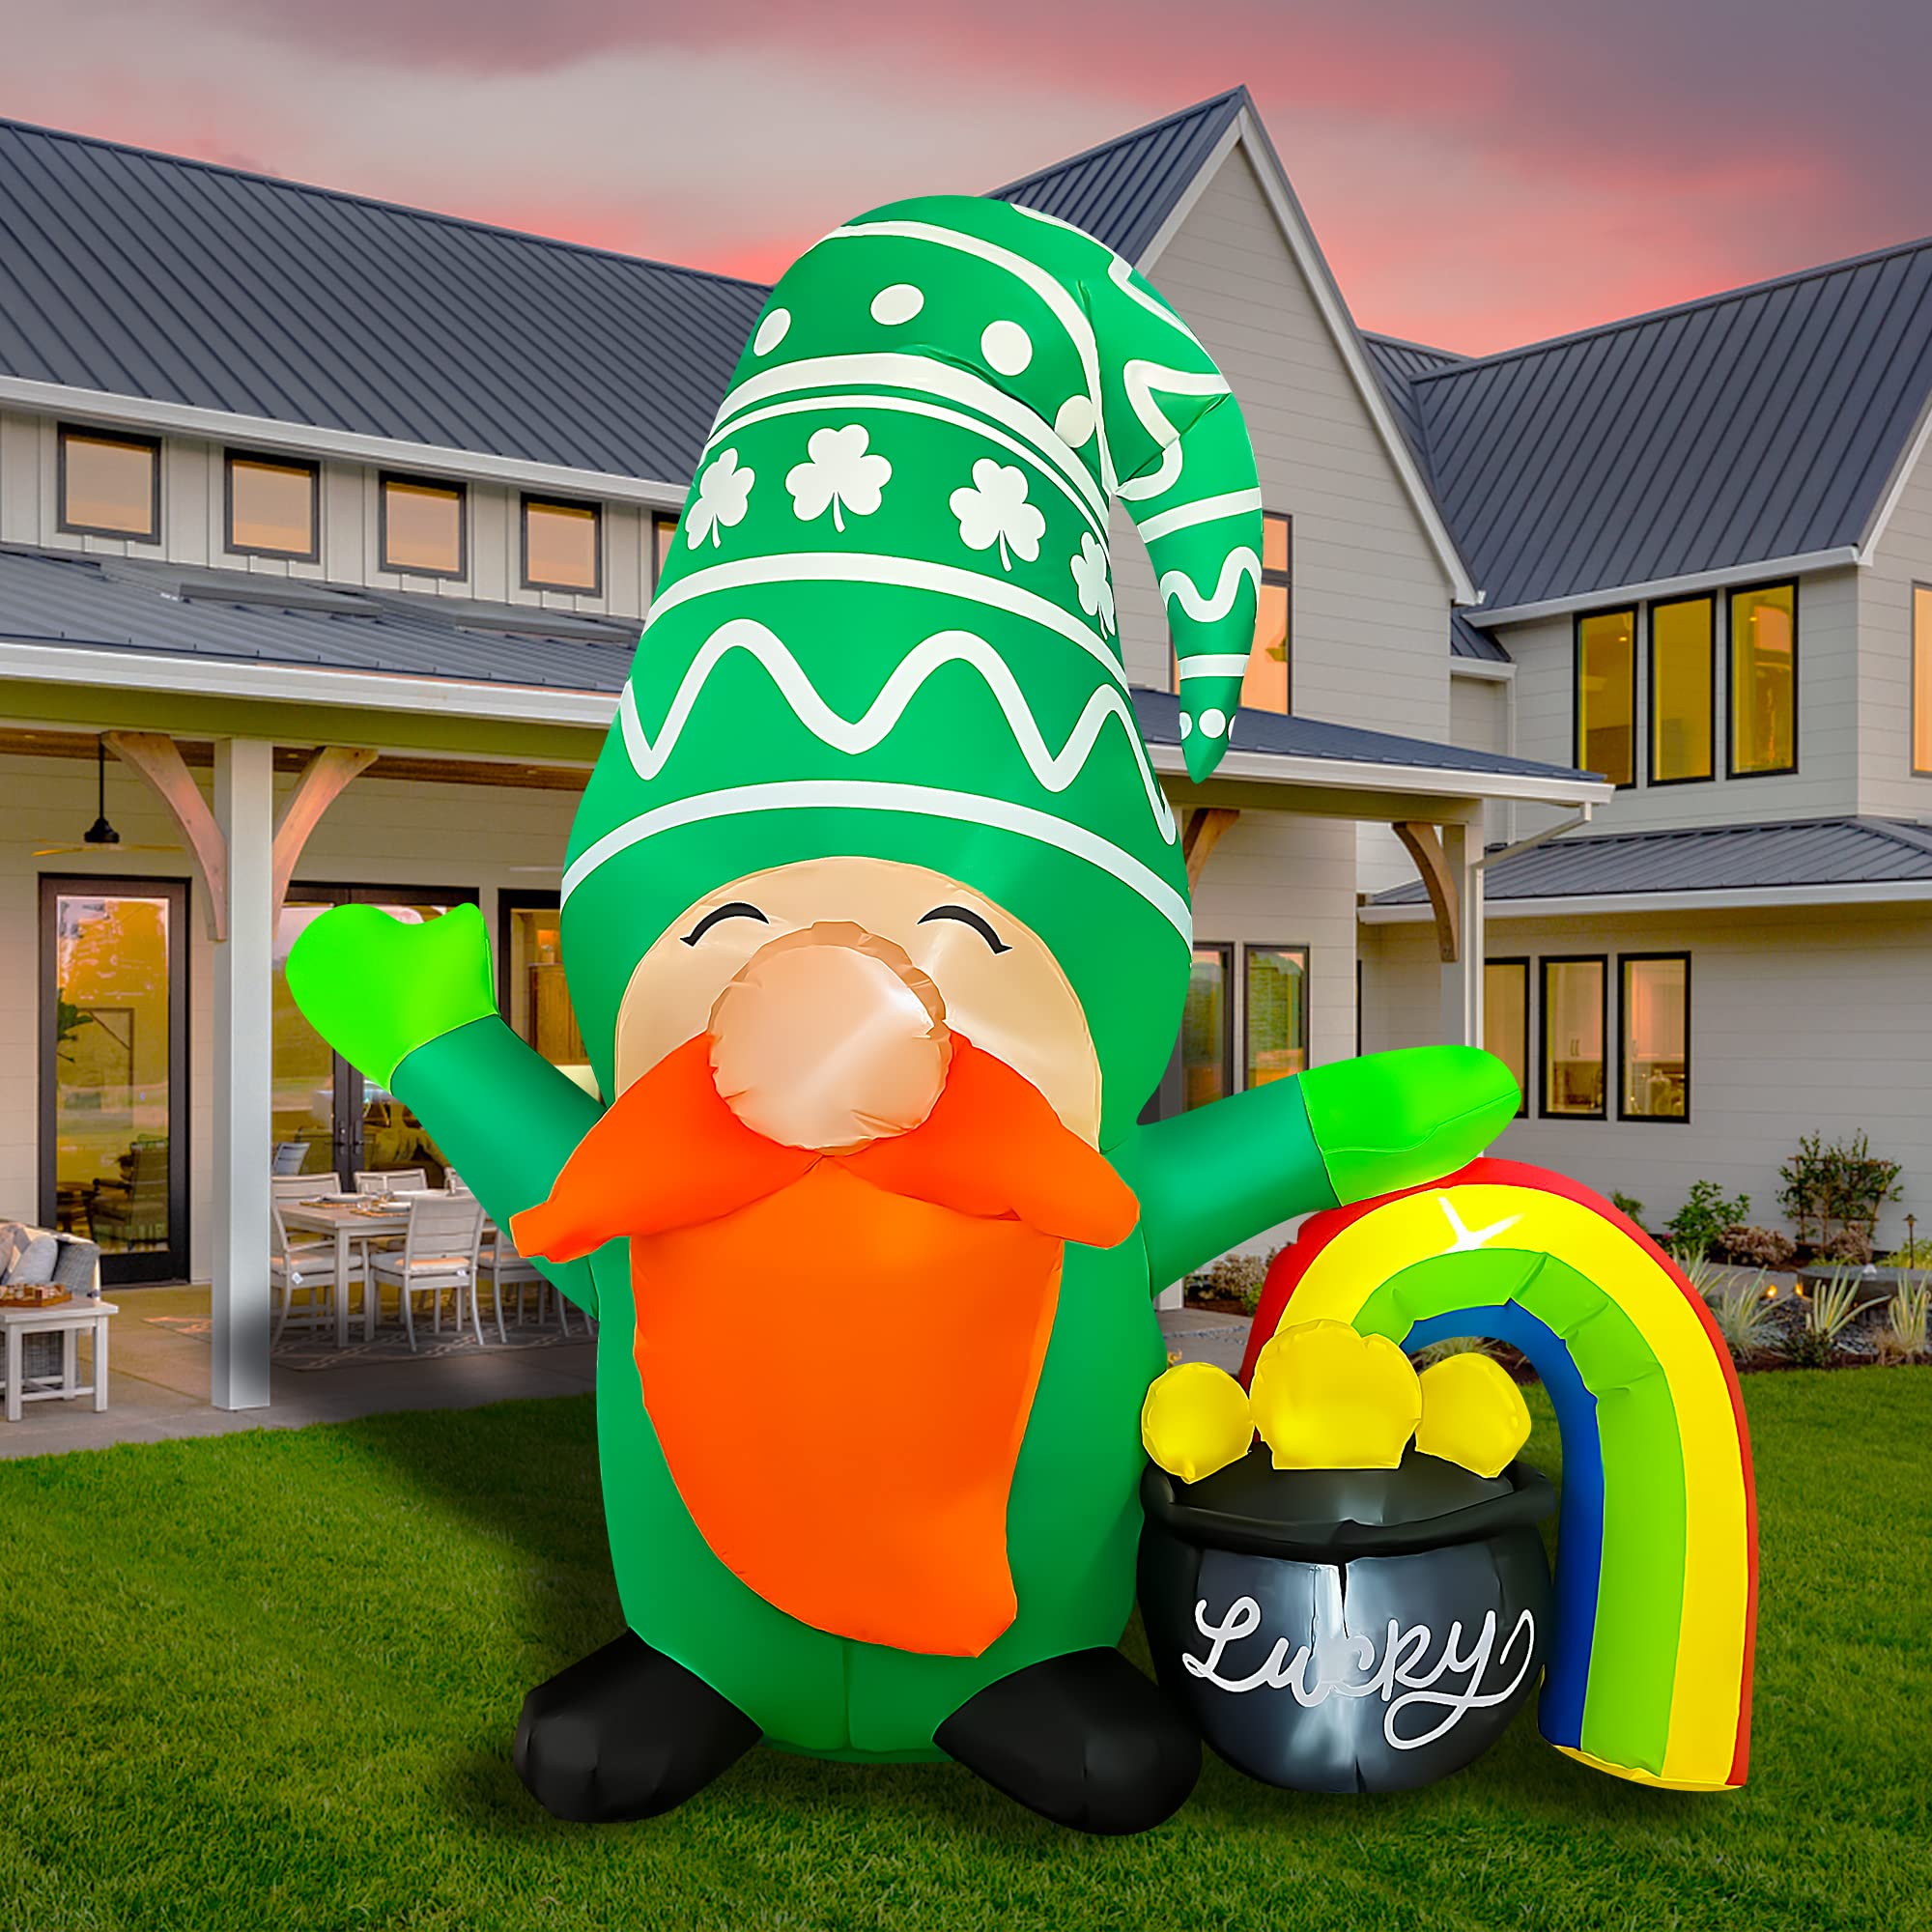 JOYEASE 5Ft Inflatable St Patricks Day Gnome with Rainbow Pot of Gold Decoration, LED Light Up Blow up Gnome for Home Yard Lawn Garden Indoor Outdoor Party Holiday Decor